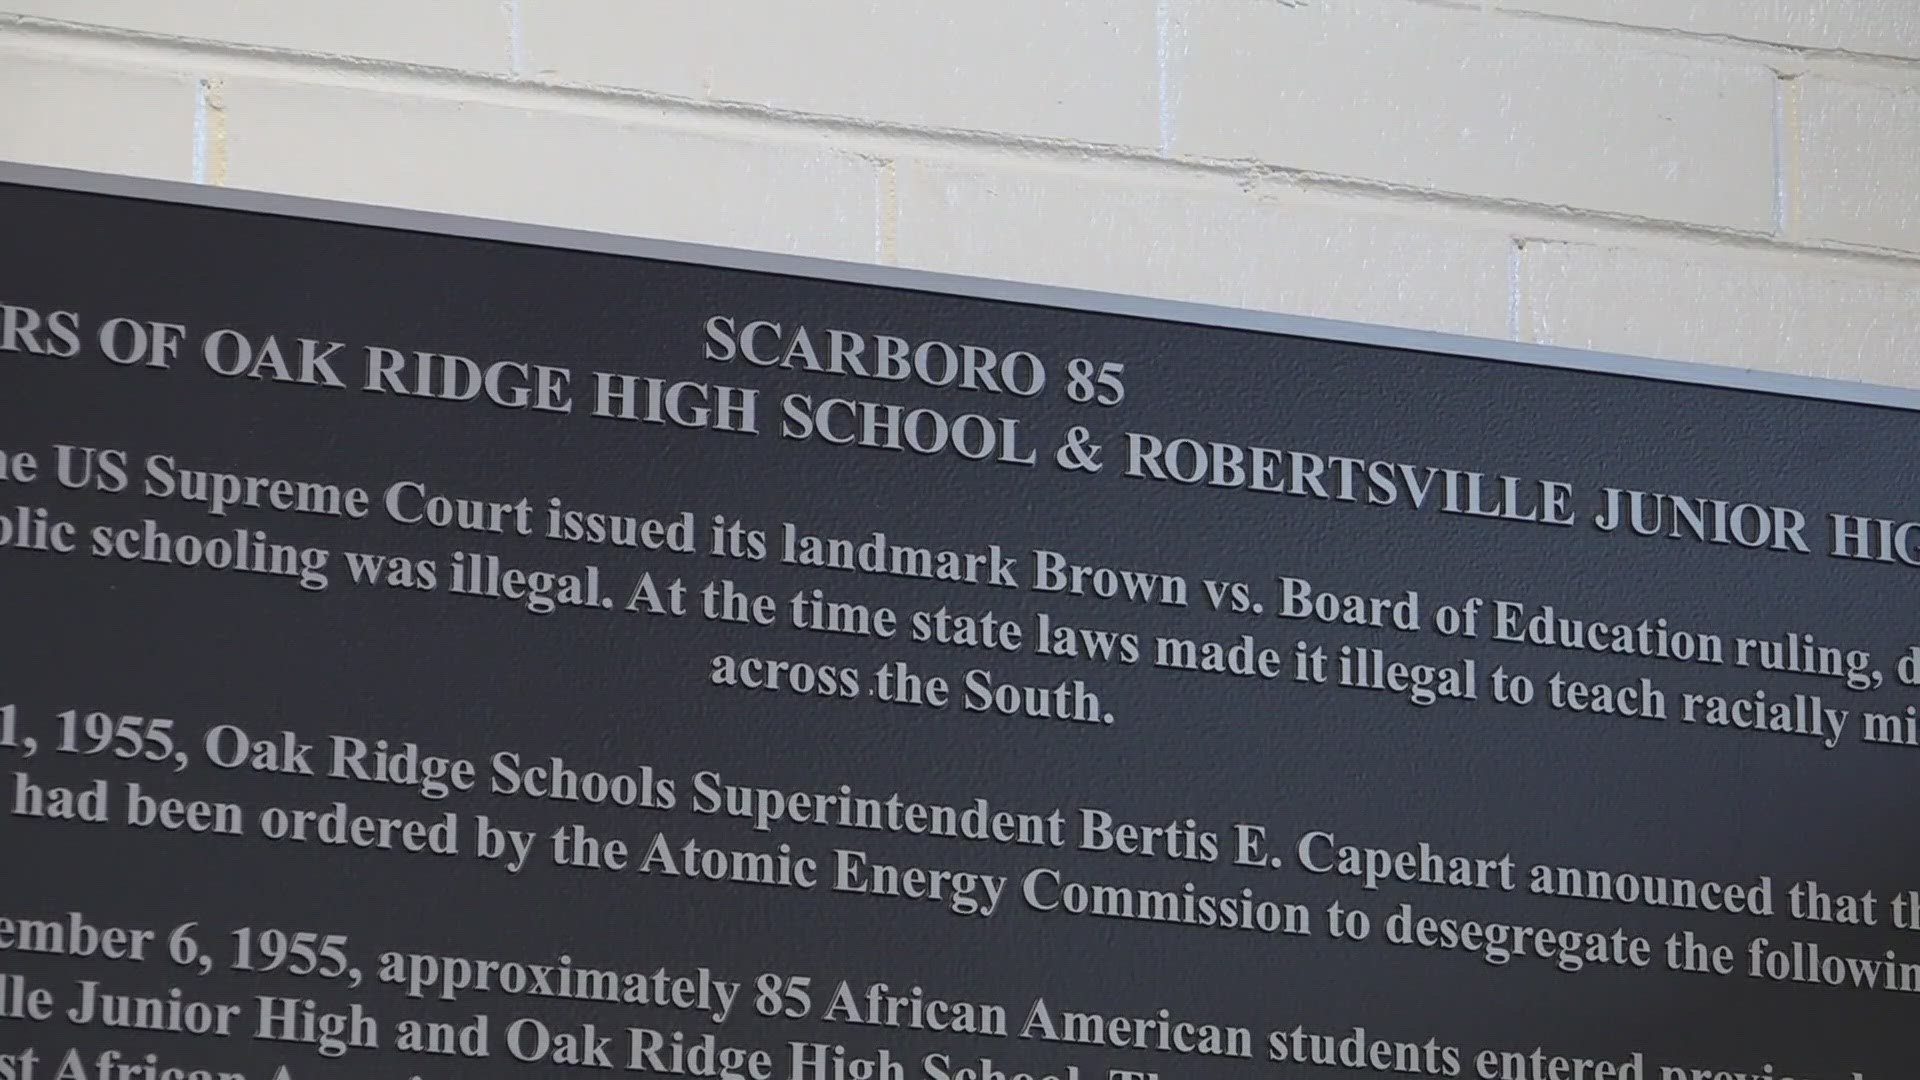 The Scarboro 85 was the first group of Black students in the southeast to attend an integrated school.